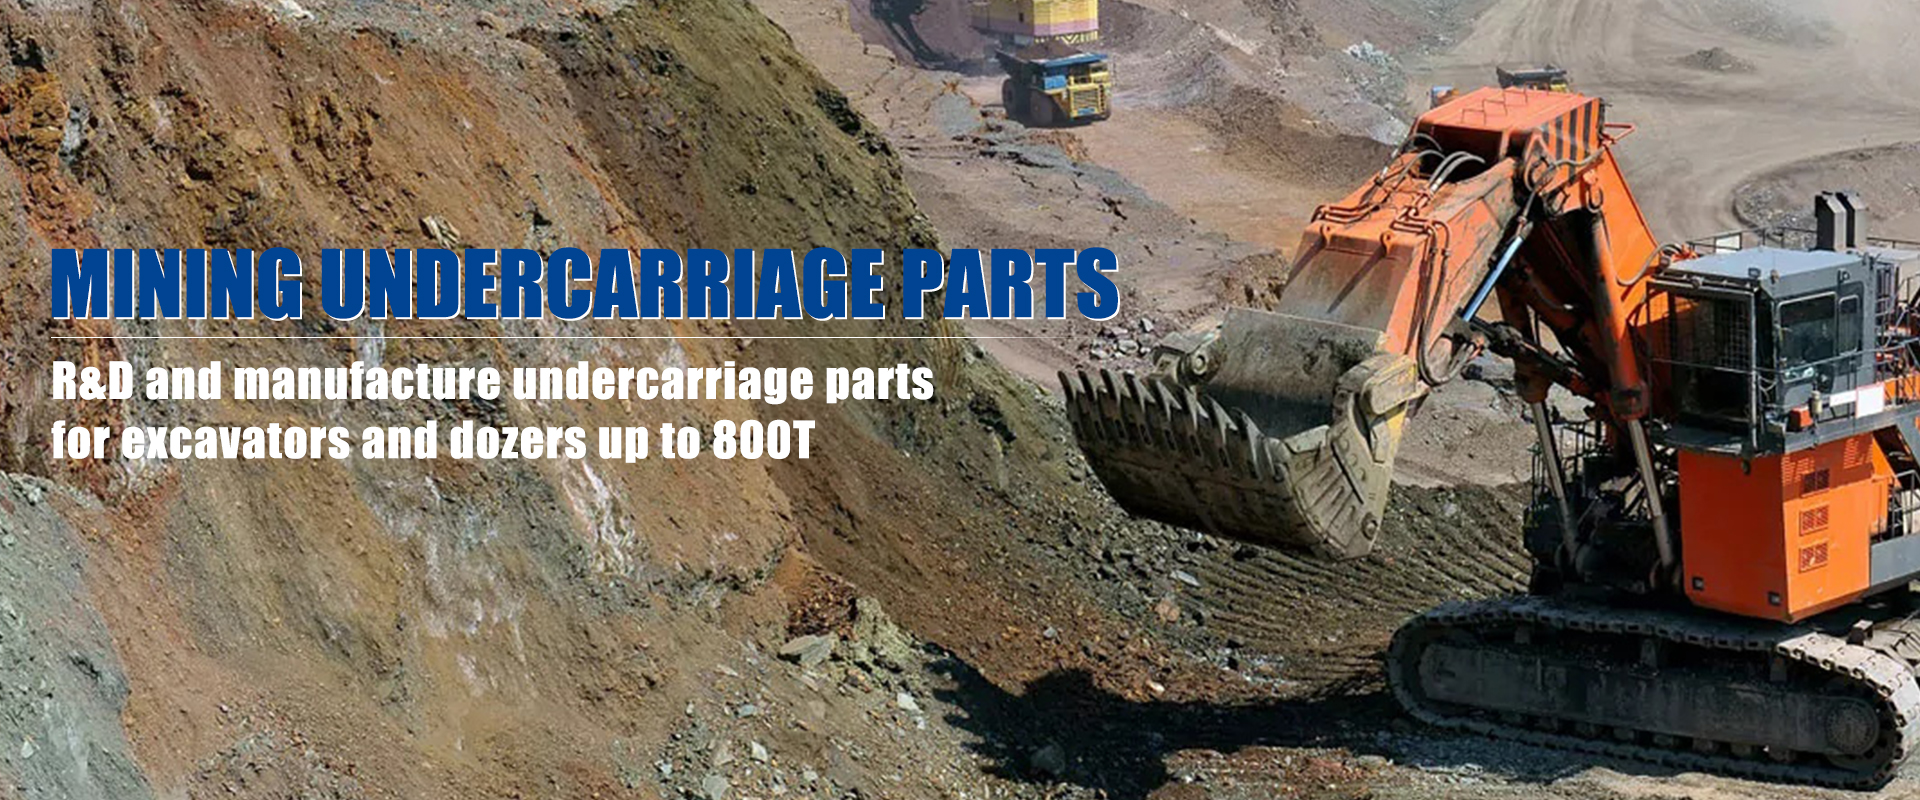 mining undercarriage parts